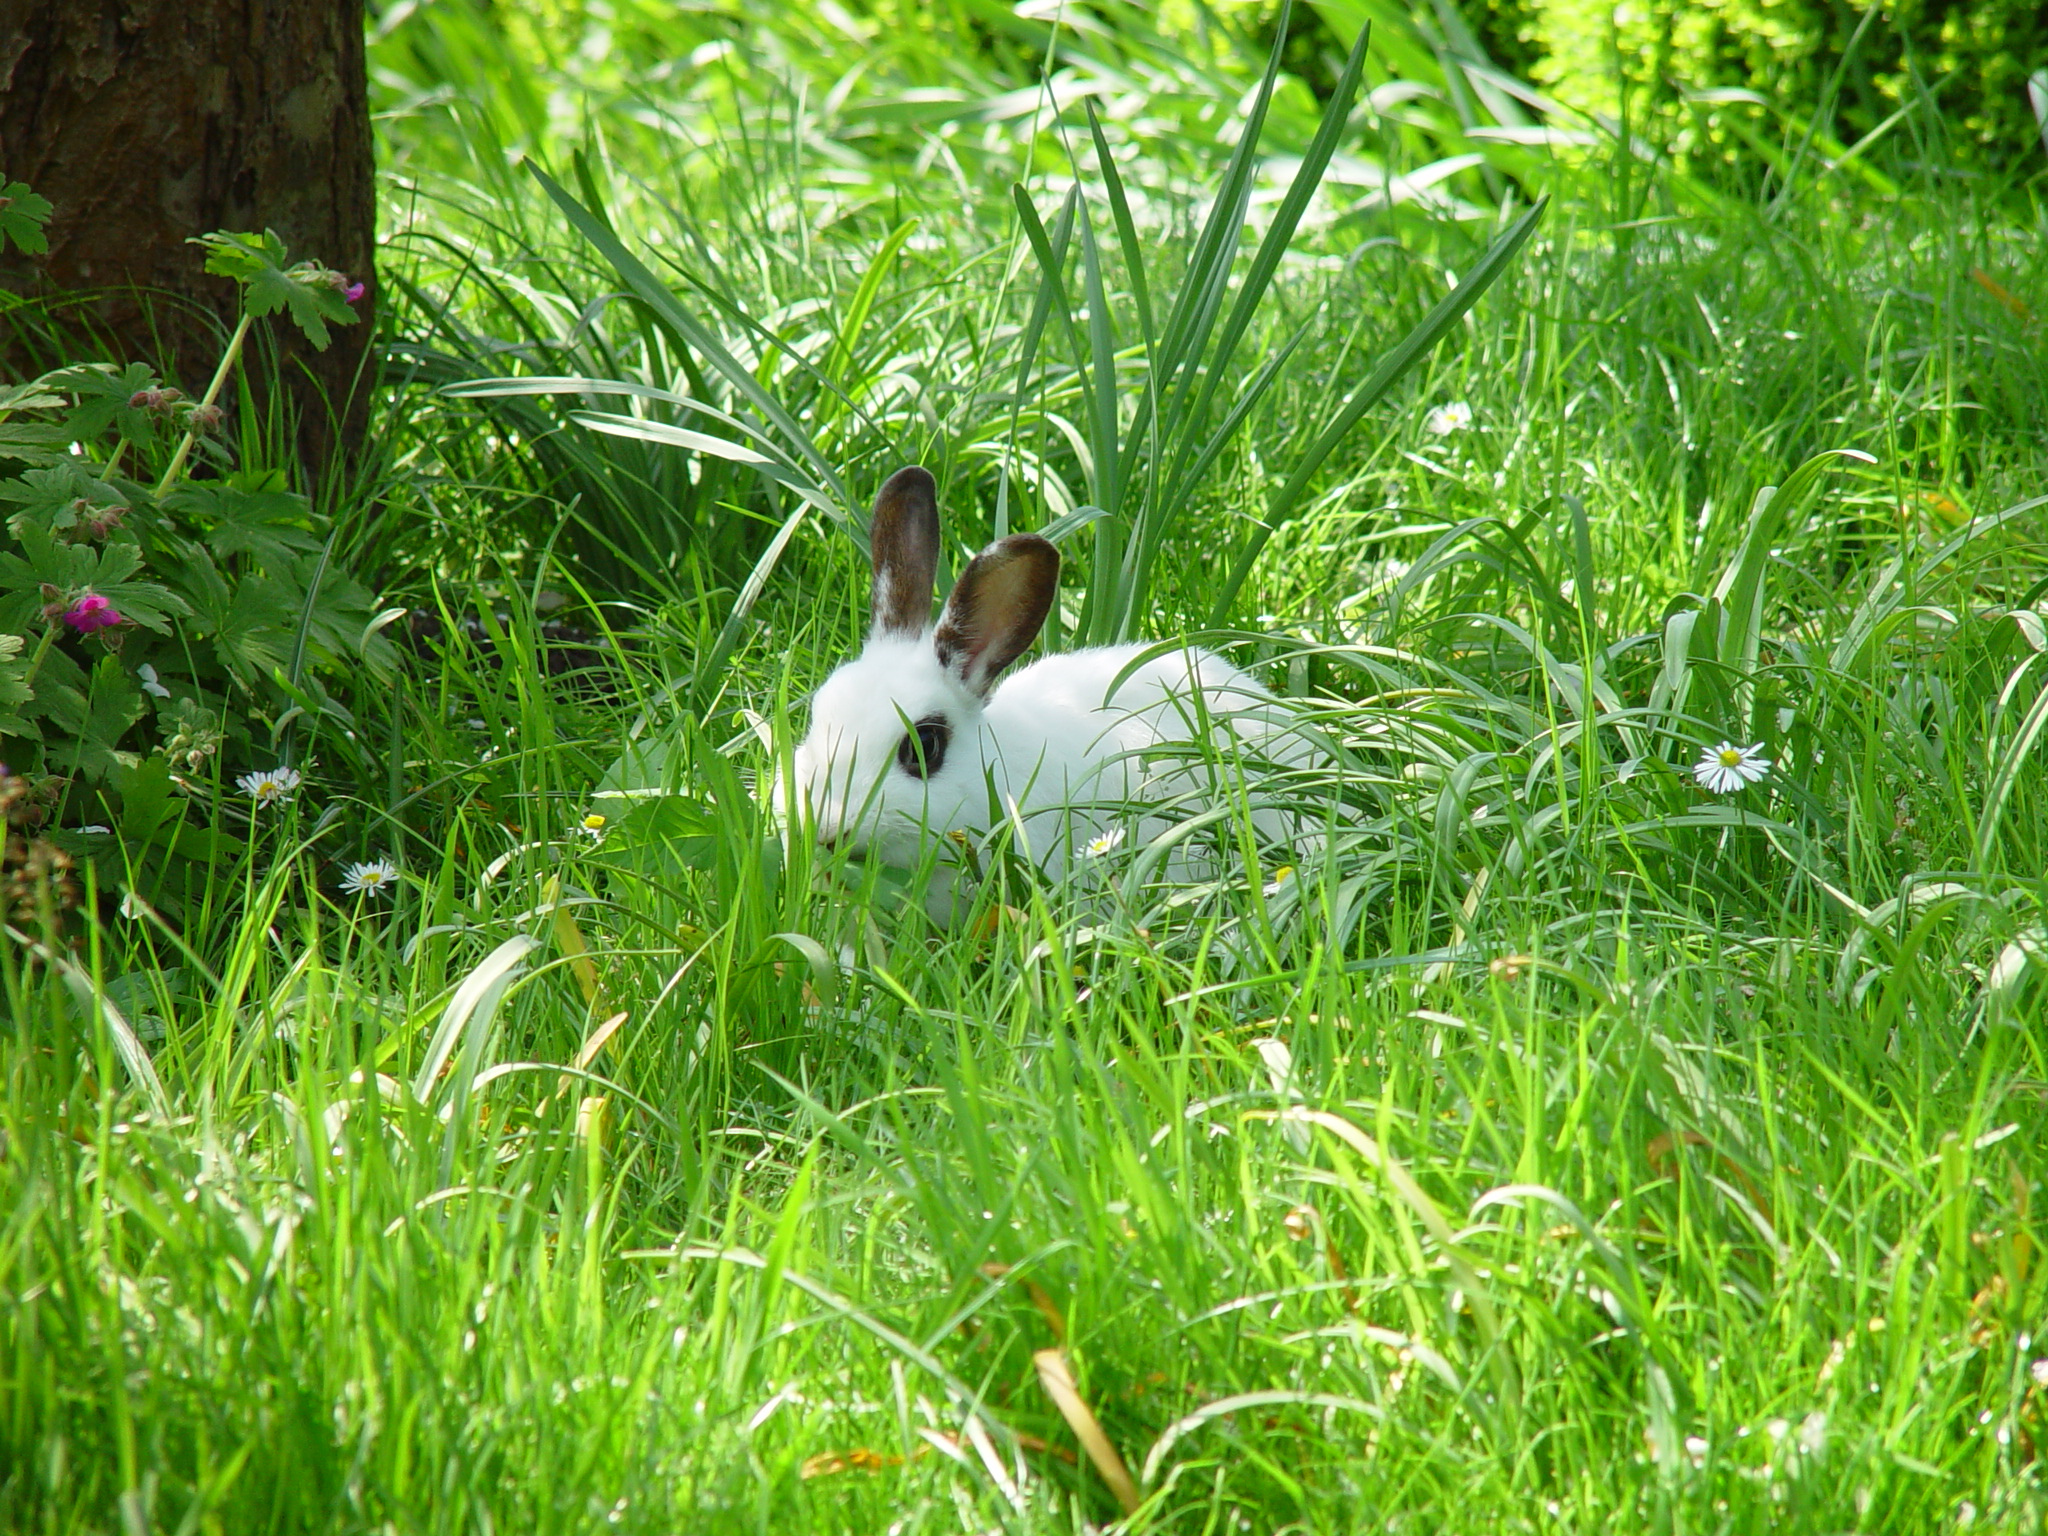 Adventurous Bunnies Explore the Lawn and Tall Grasses 4